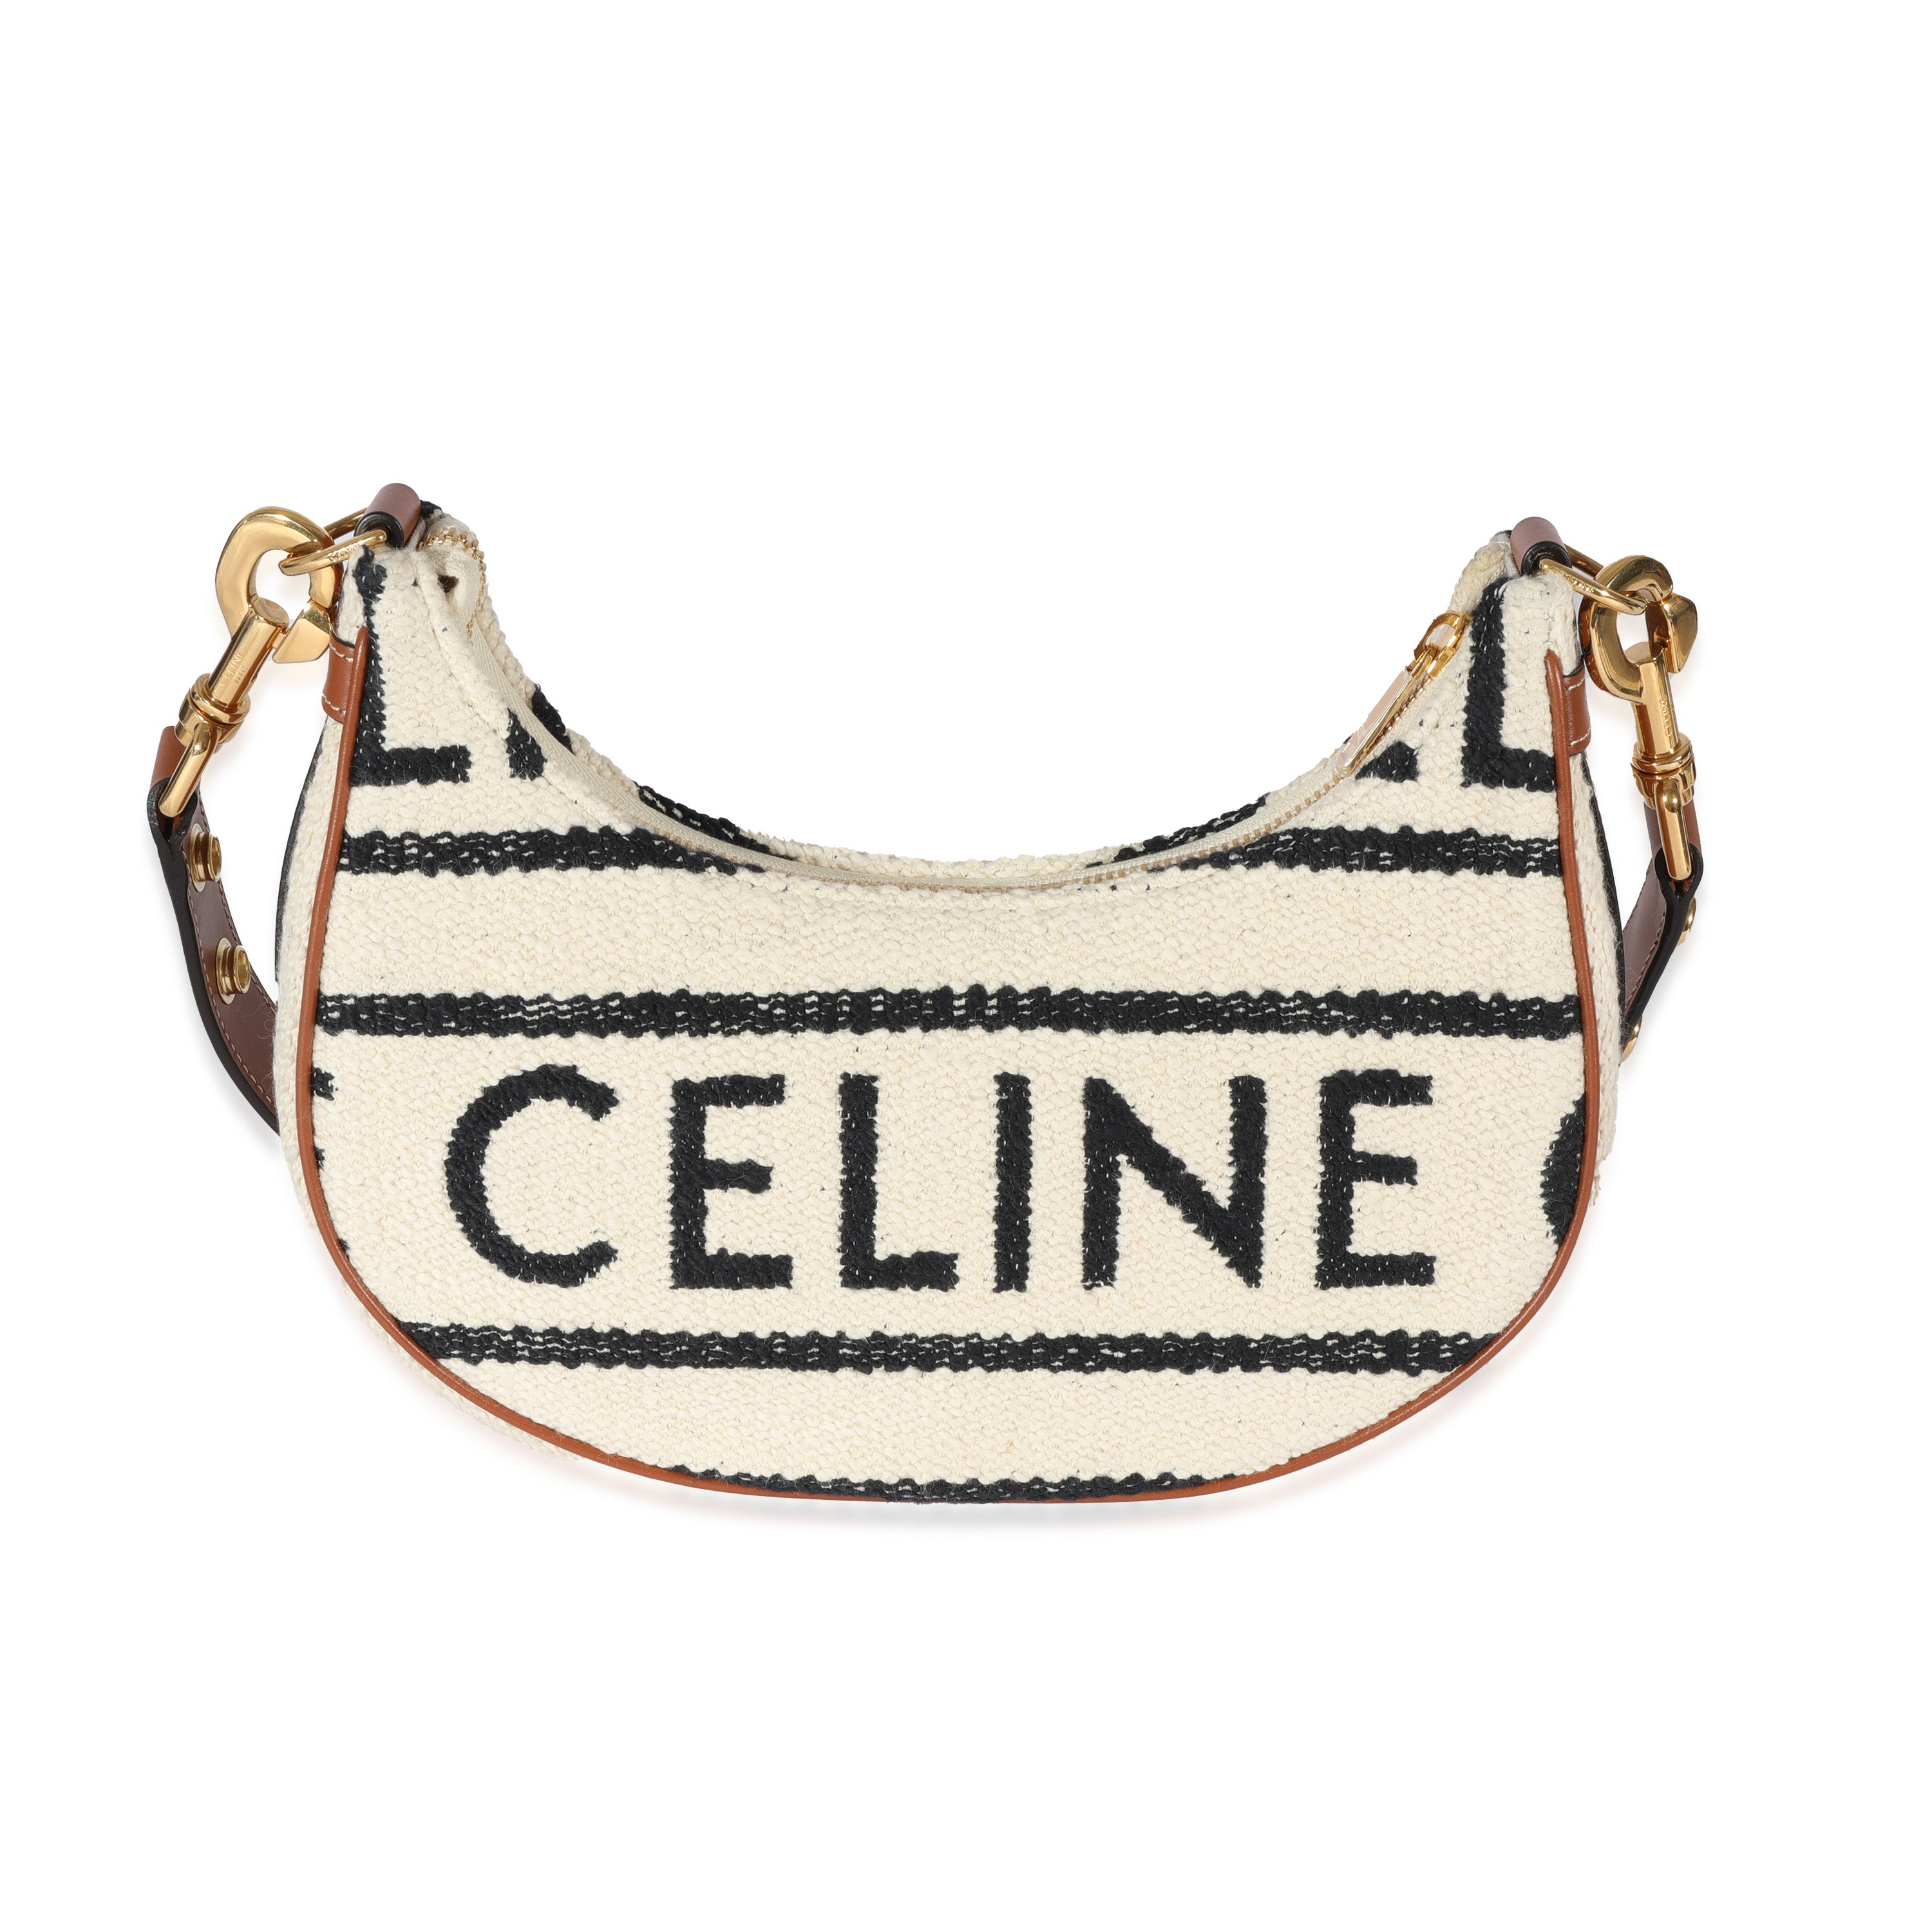 Lock Toiletry Pouch in Triomphe Canvas and Calfskin